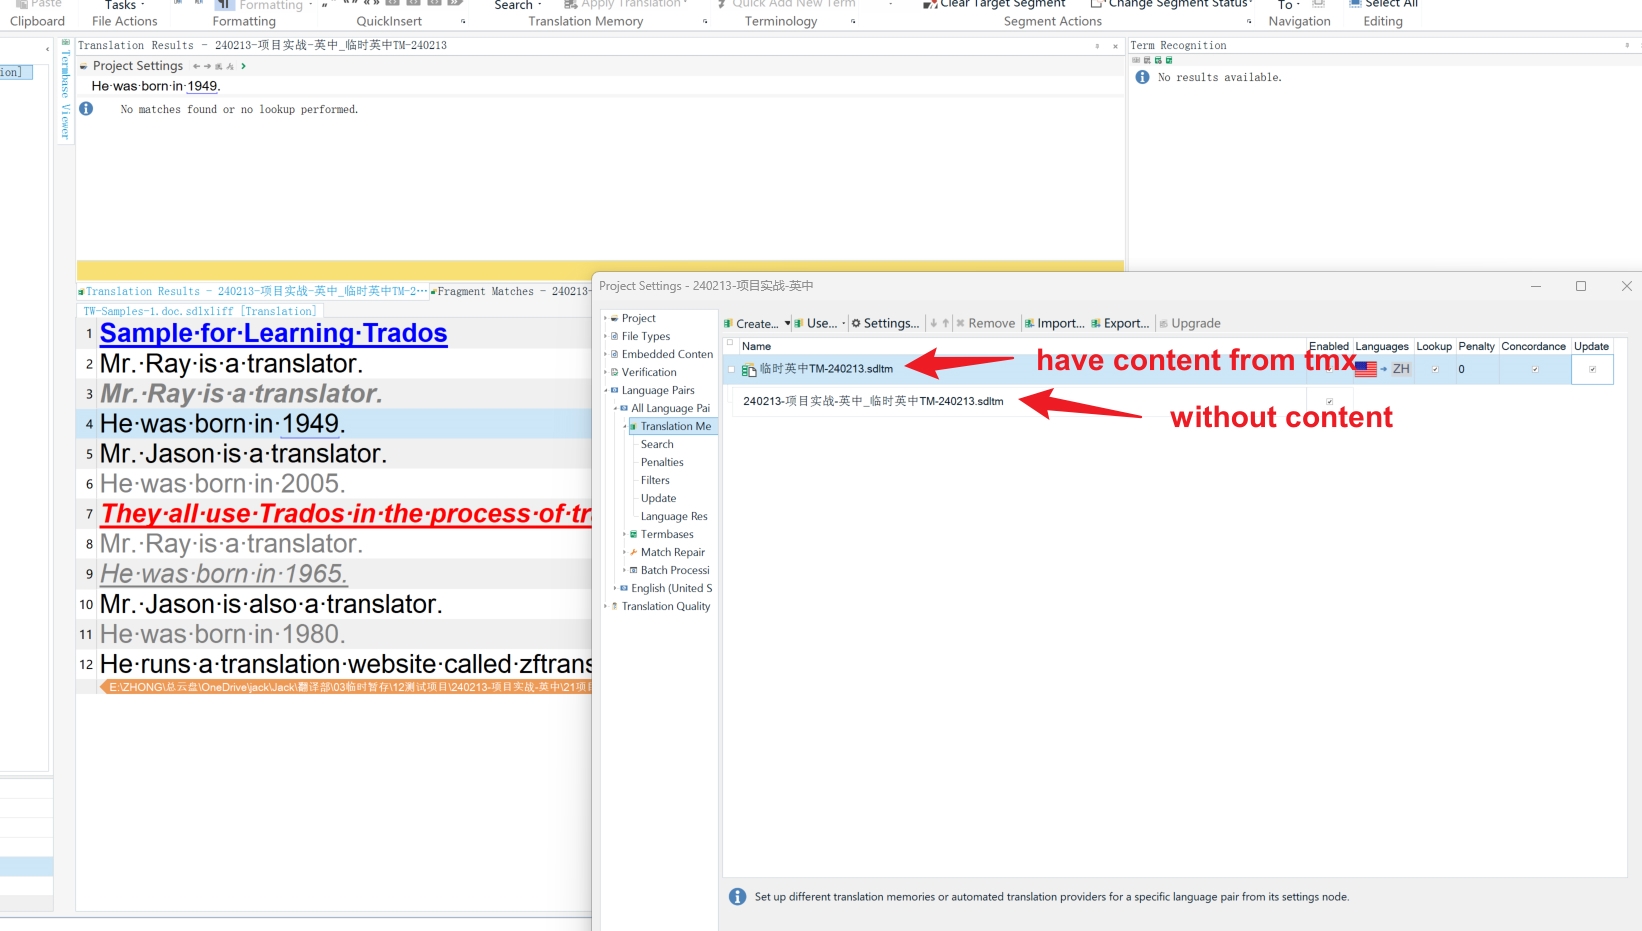 Screenshot of Trados Studio showing two translation memories, one with content from TMX and one without content.